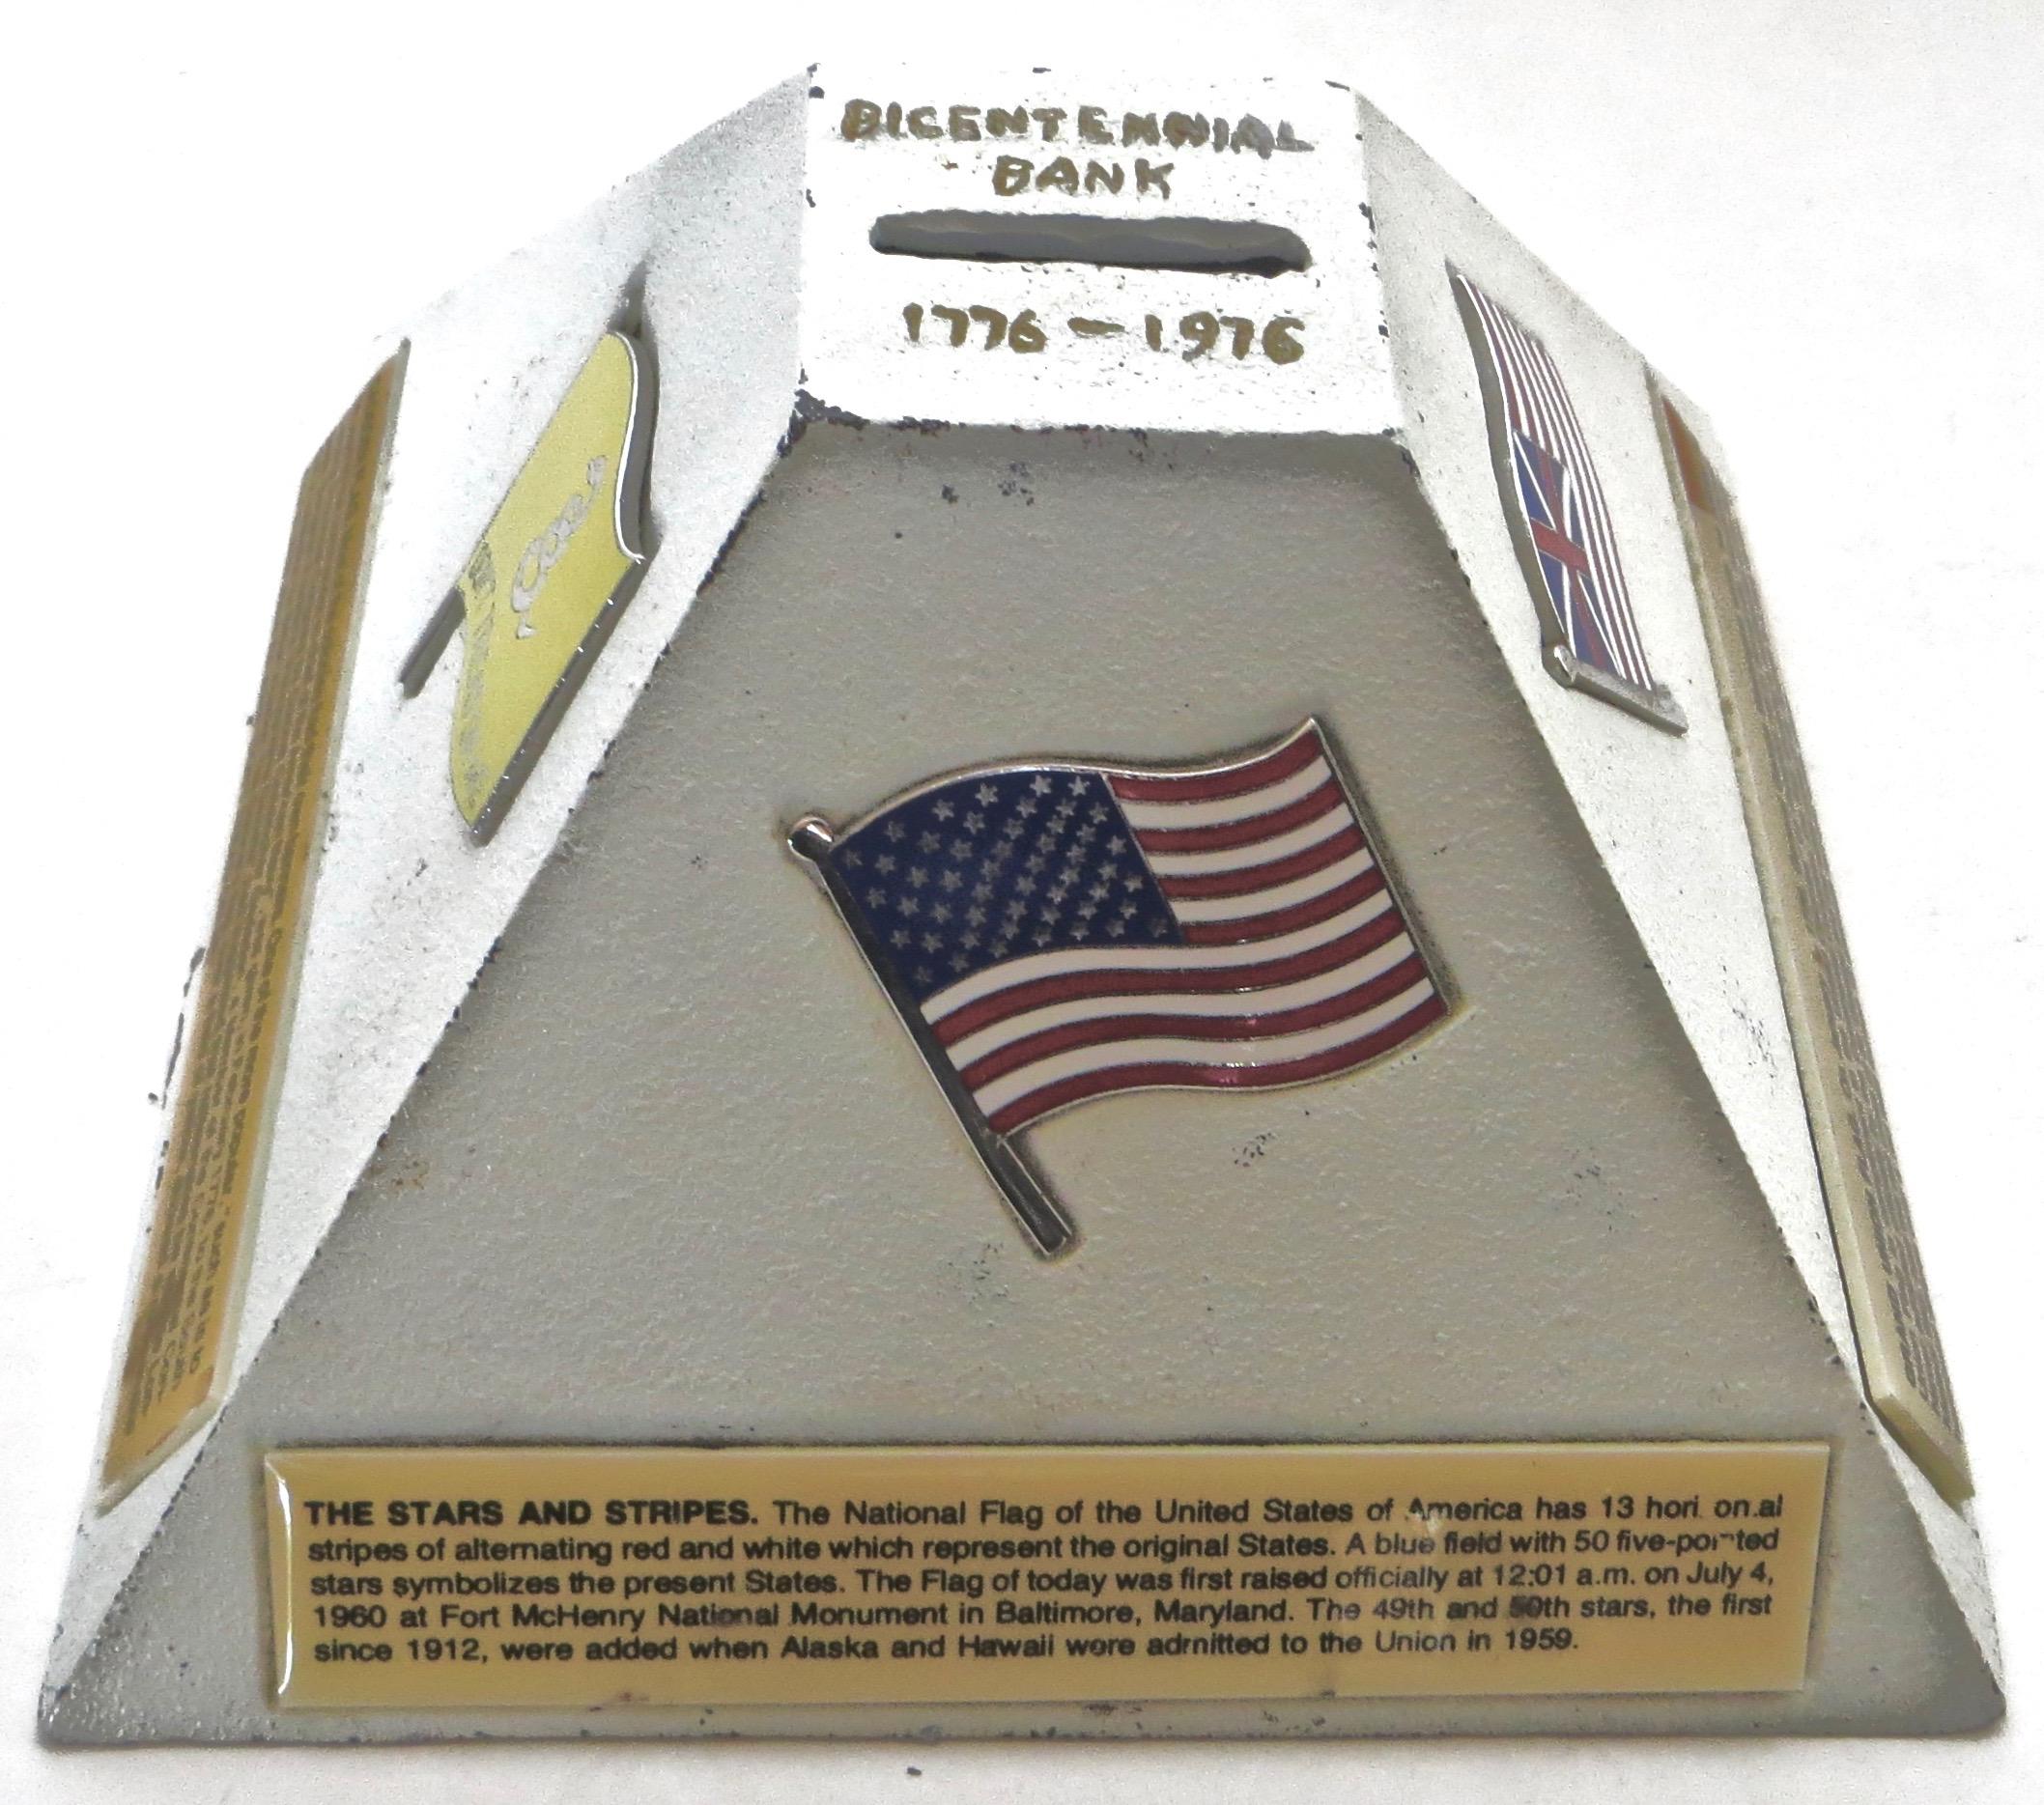 Shaped like a pyramid this cast iron penny bank was made to commemorate the 200 year anniversary of America; thus inscribed at the top (see image) 1776-1976. It is painted in white (all original) and in excellent condition, with the four original,